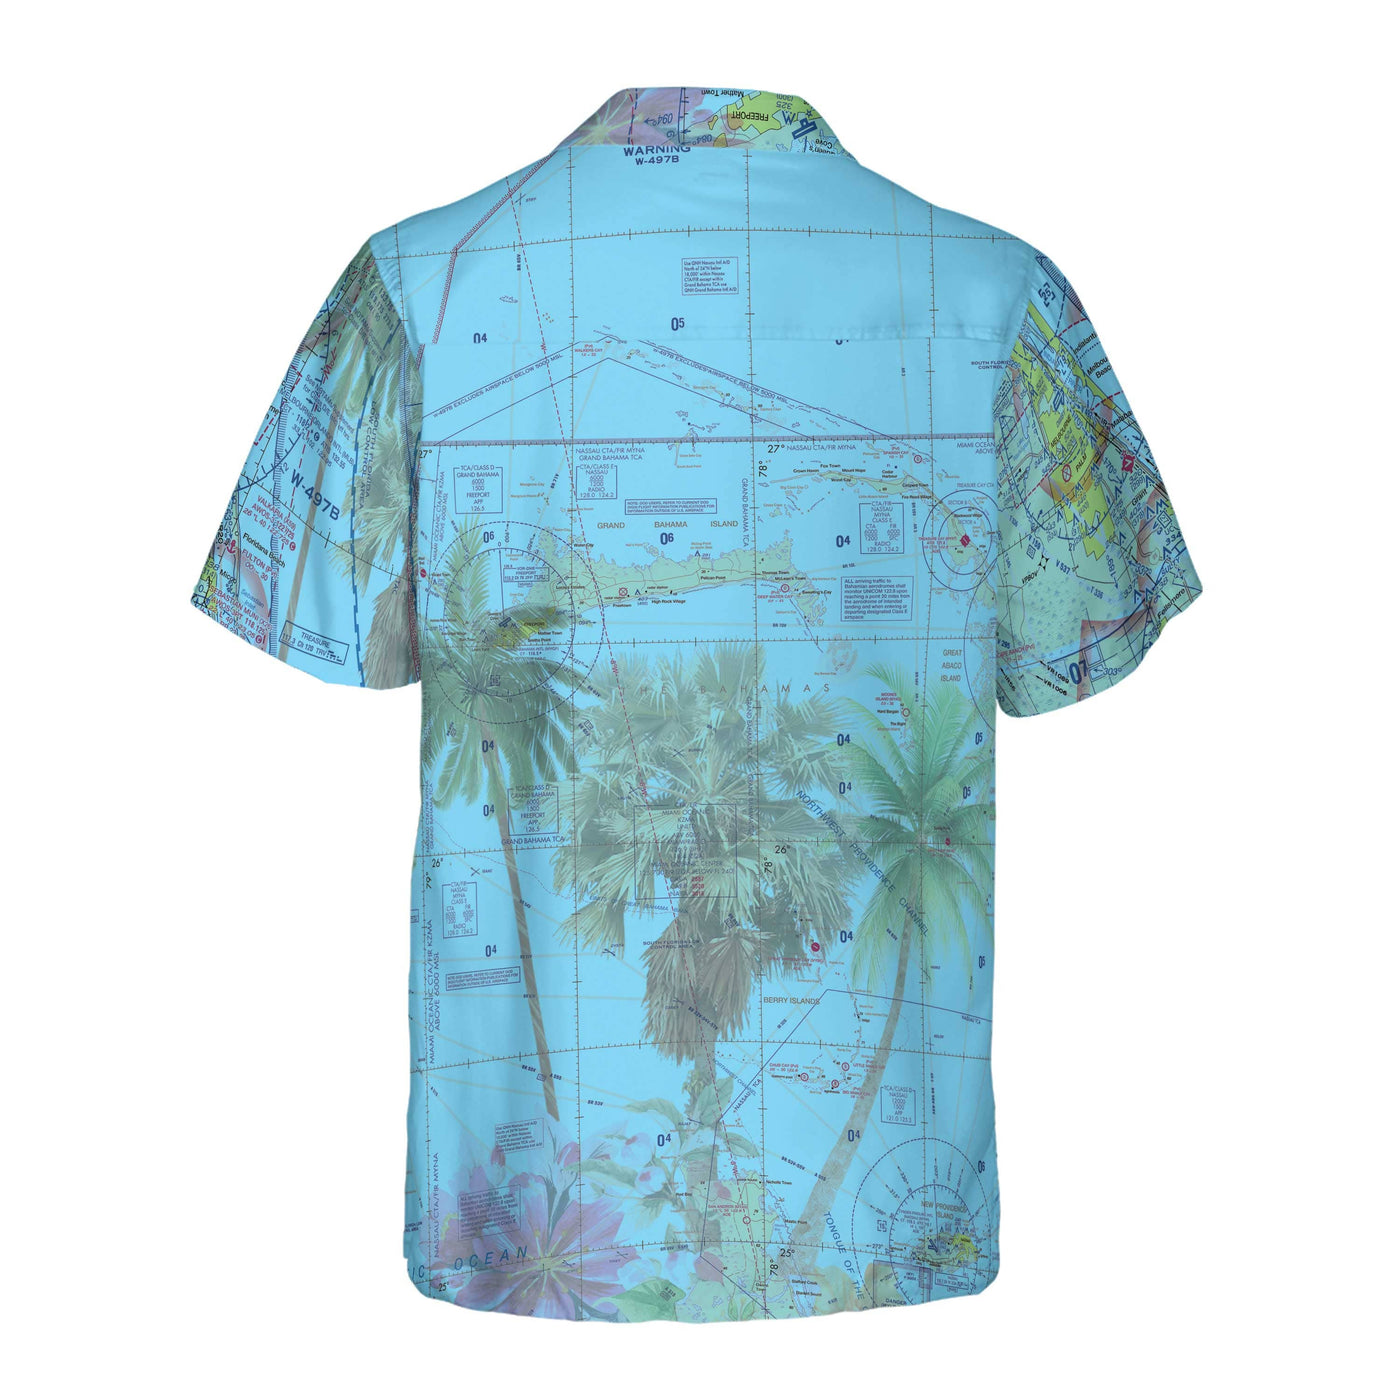 AOP Coconut Button Shirt The Florida to Bahamas Blue Sky with Palms Coconut Button Camp Shirt